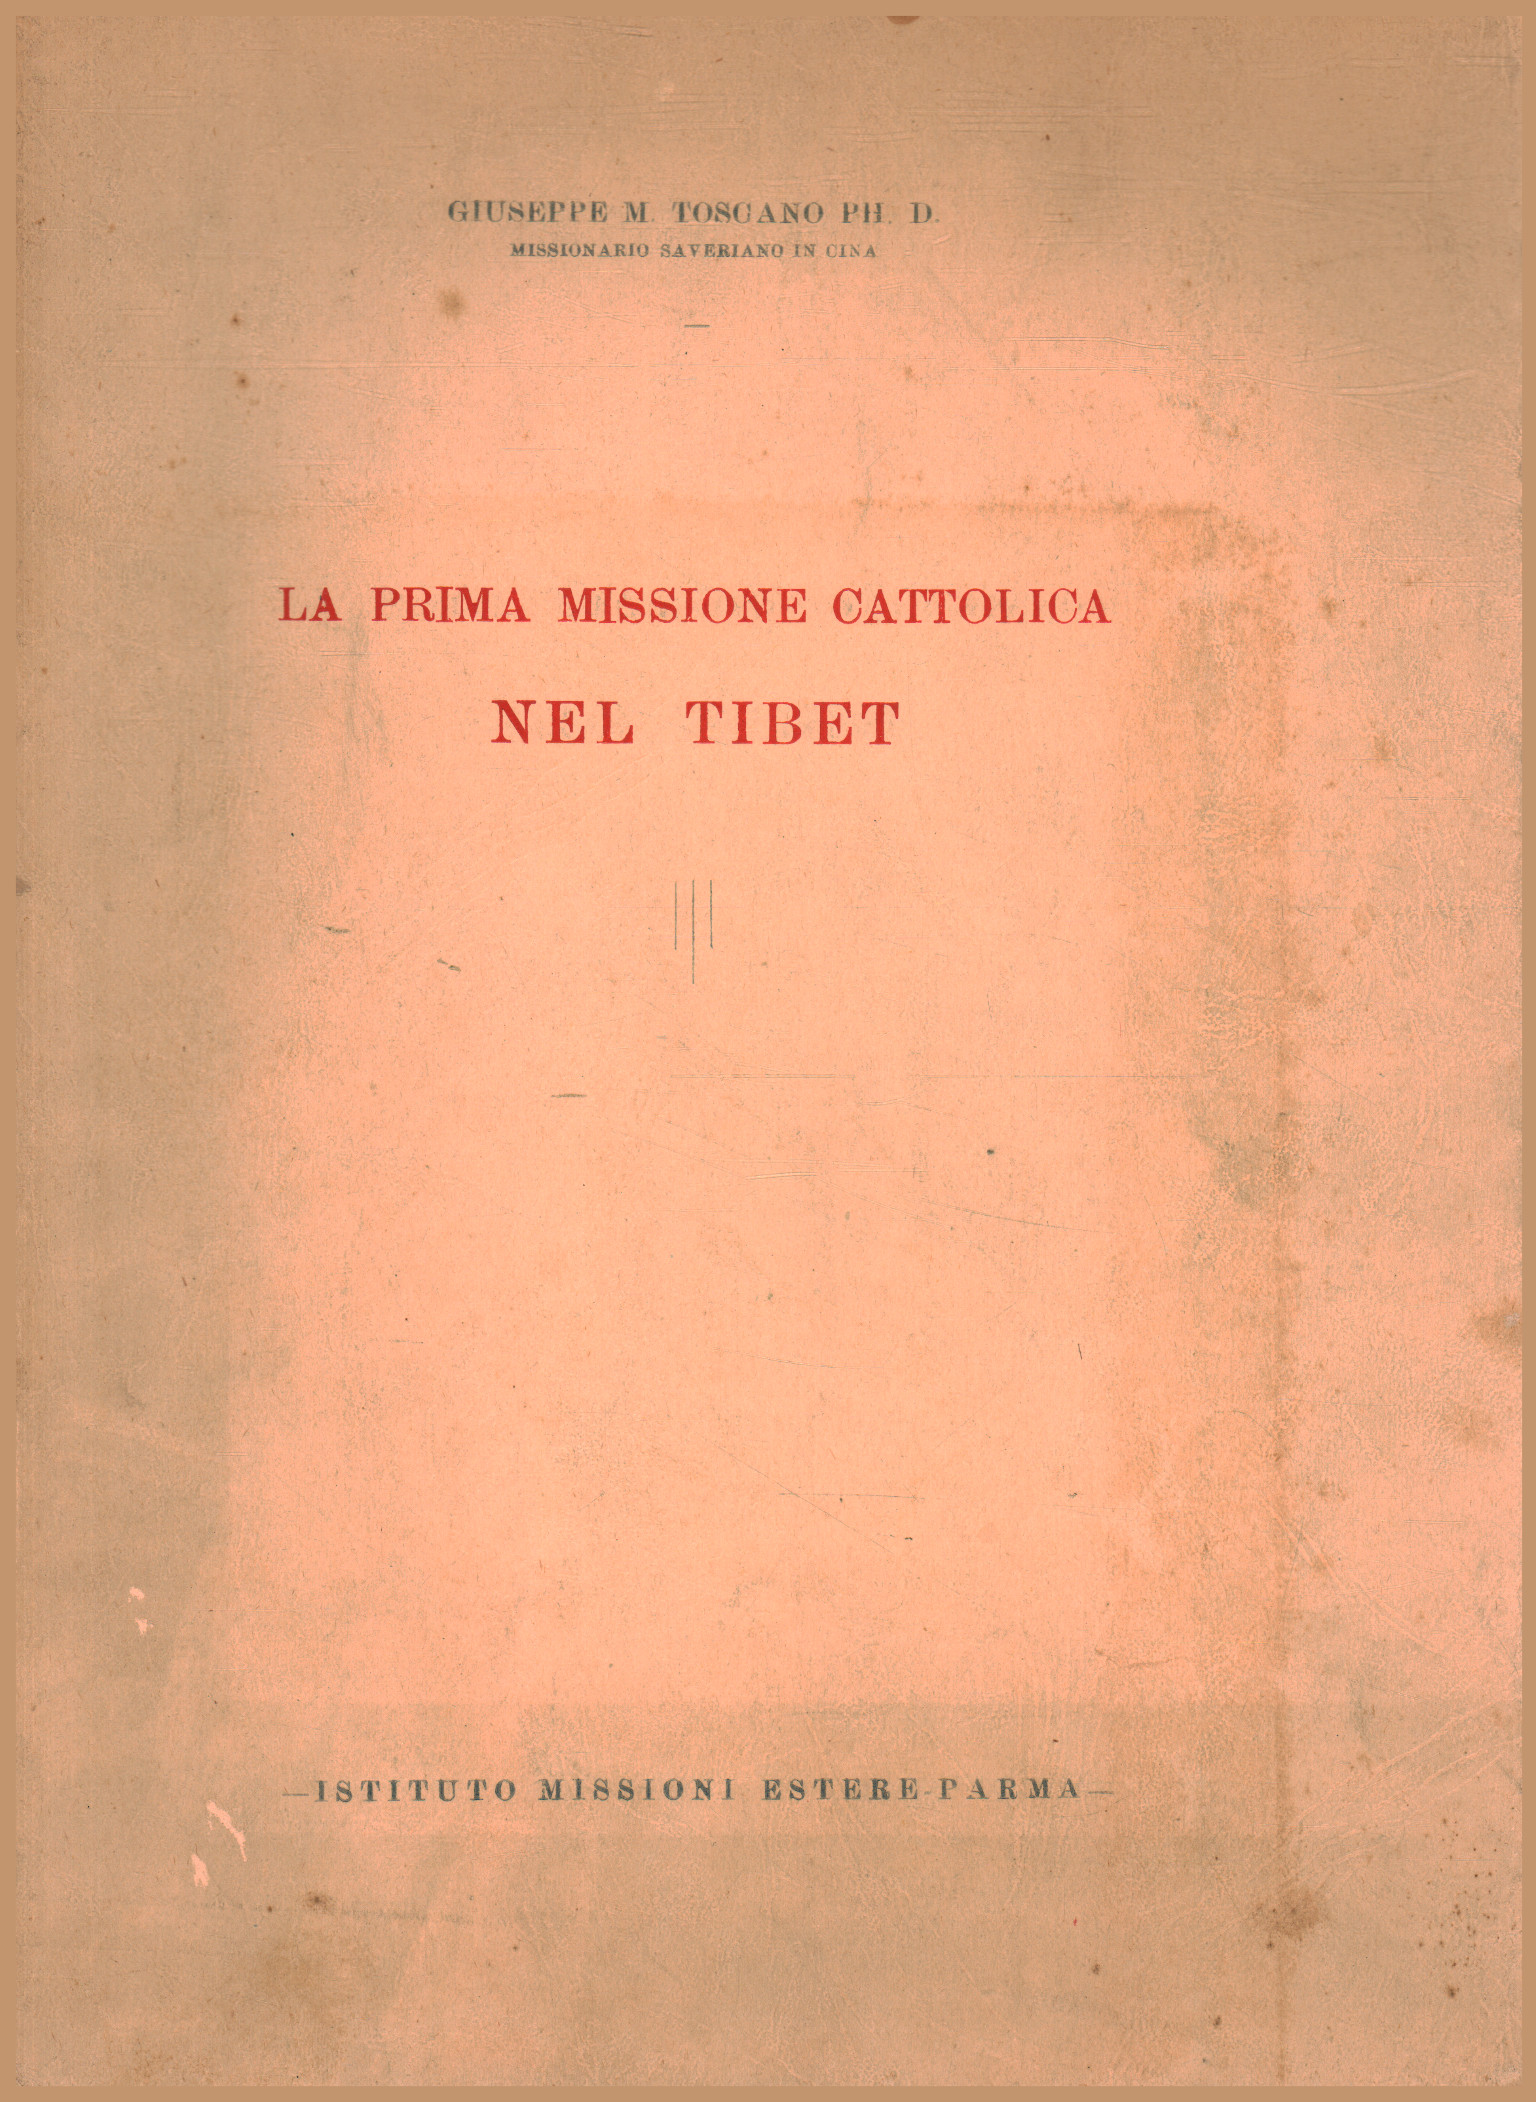 The first Catholic mission in Tibet, Giuseppe M. Toscano